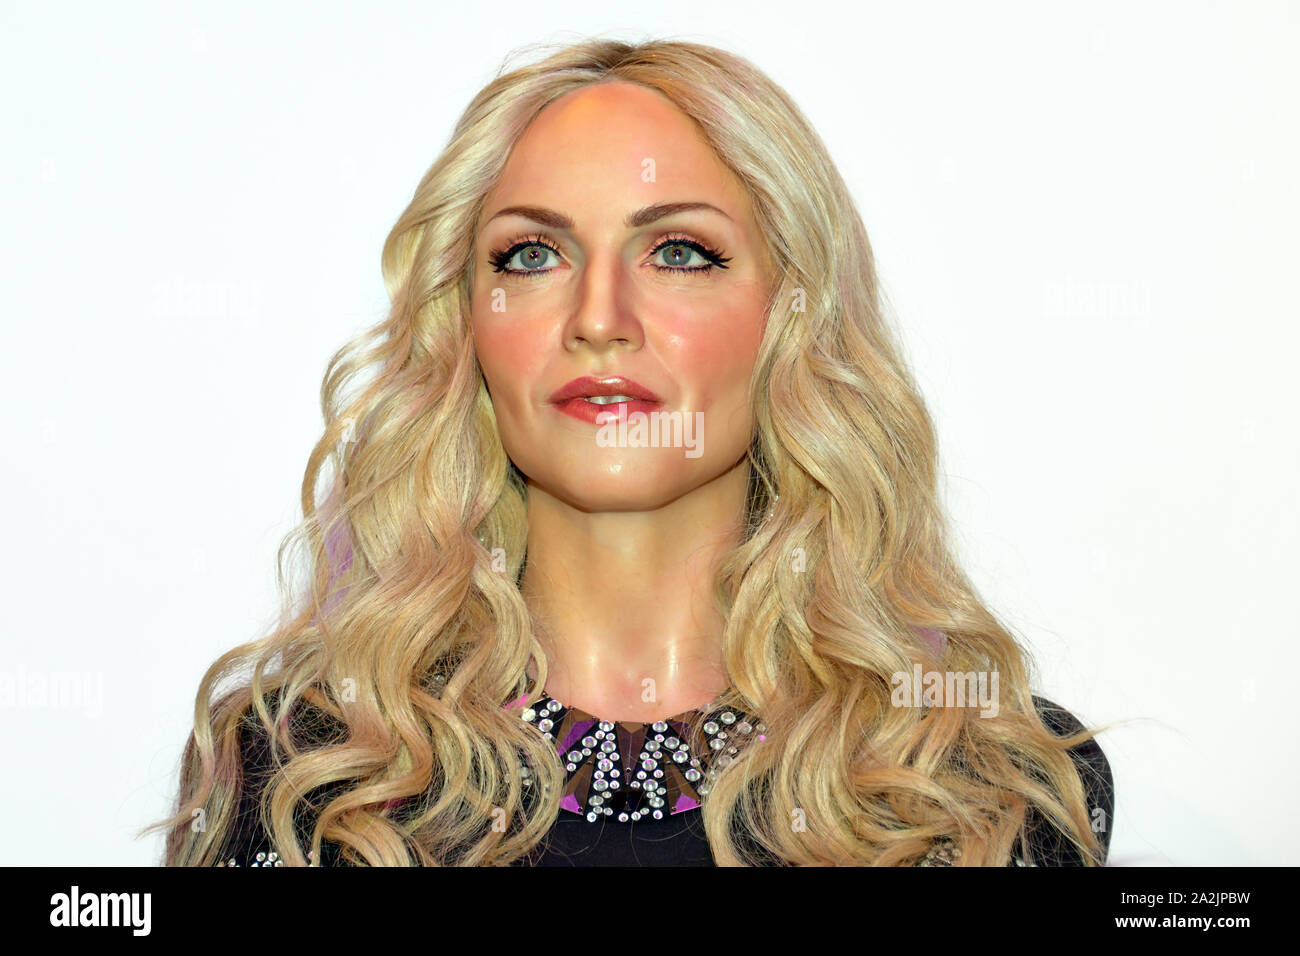 Madonna in Madame Tussauds Las Vegas NV, USA 30-09-18. She is a popular legend Stock Photo